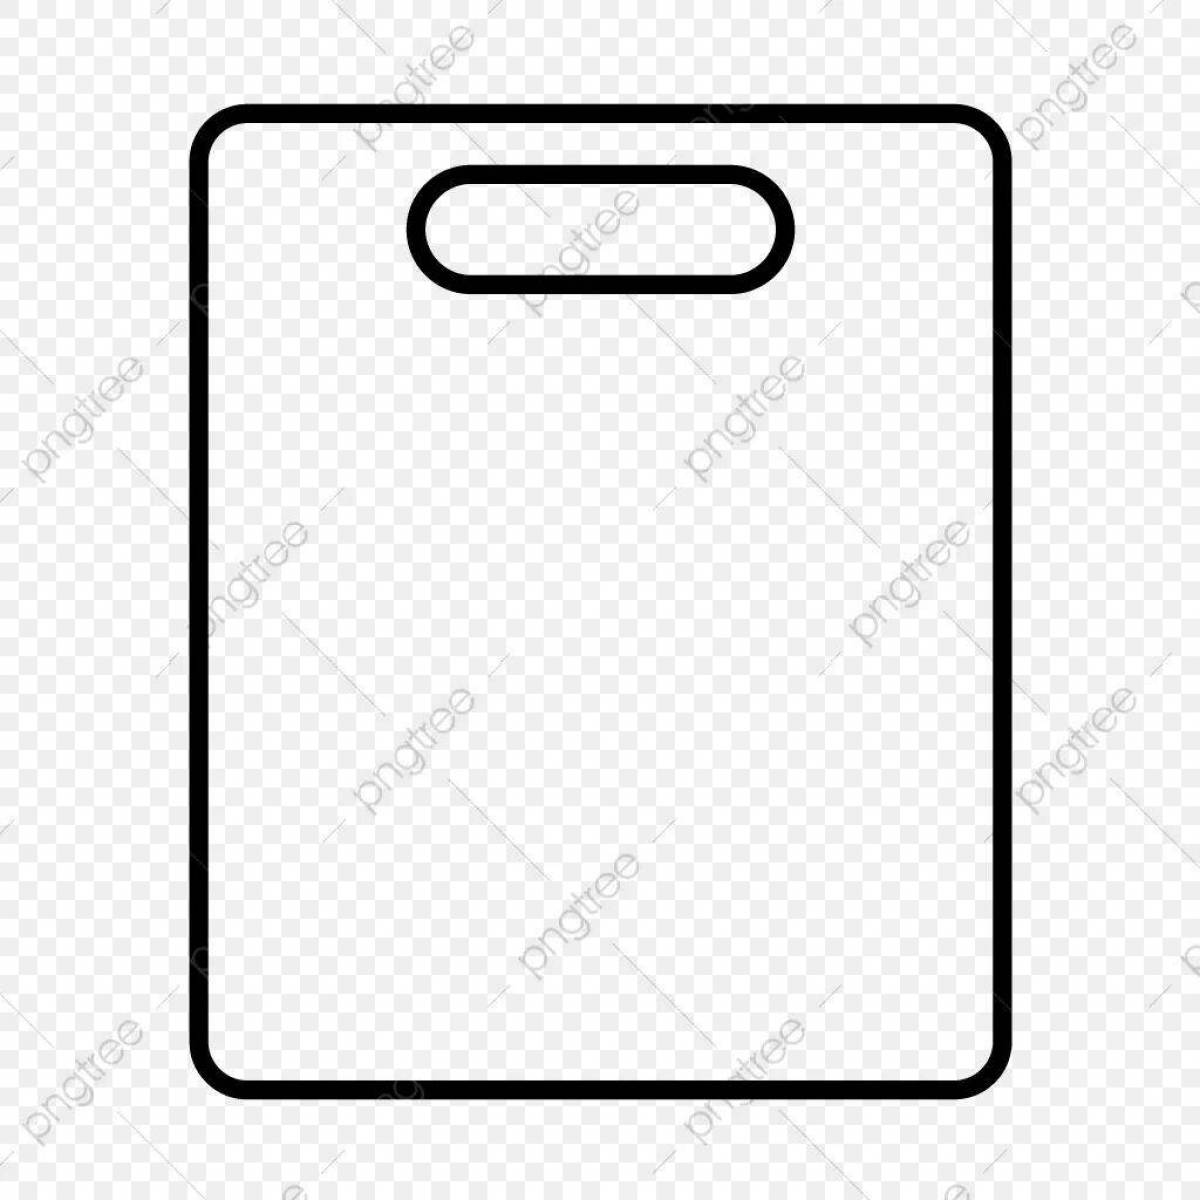 Cutting board template for sweets